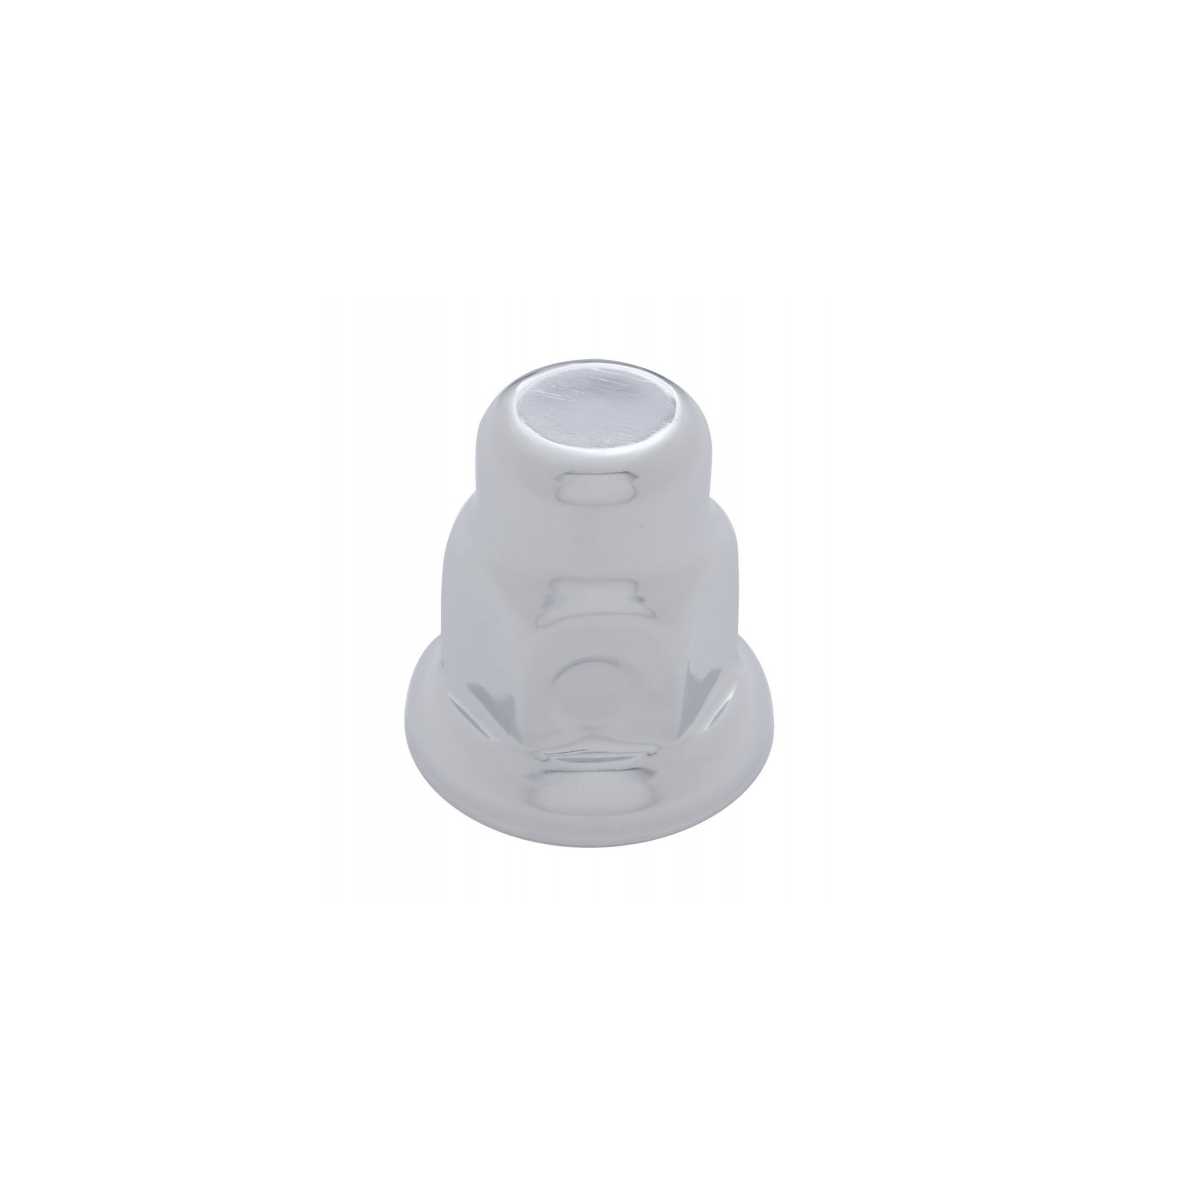 32 mm x 2 Inch Chrome Steel Tall Nut Cover with Flange